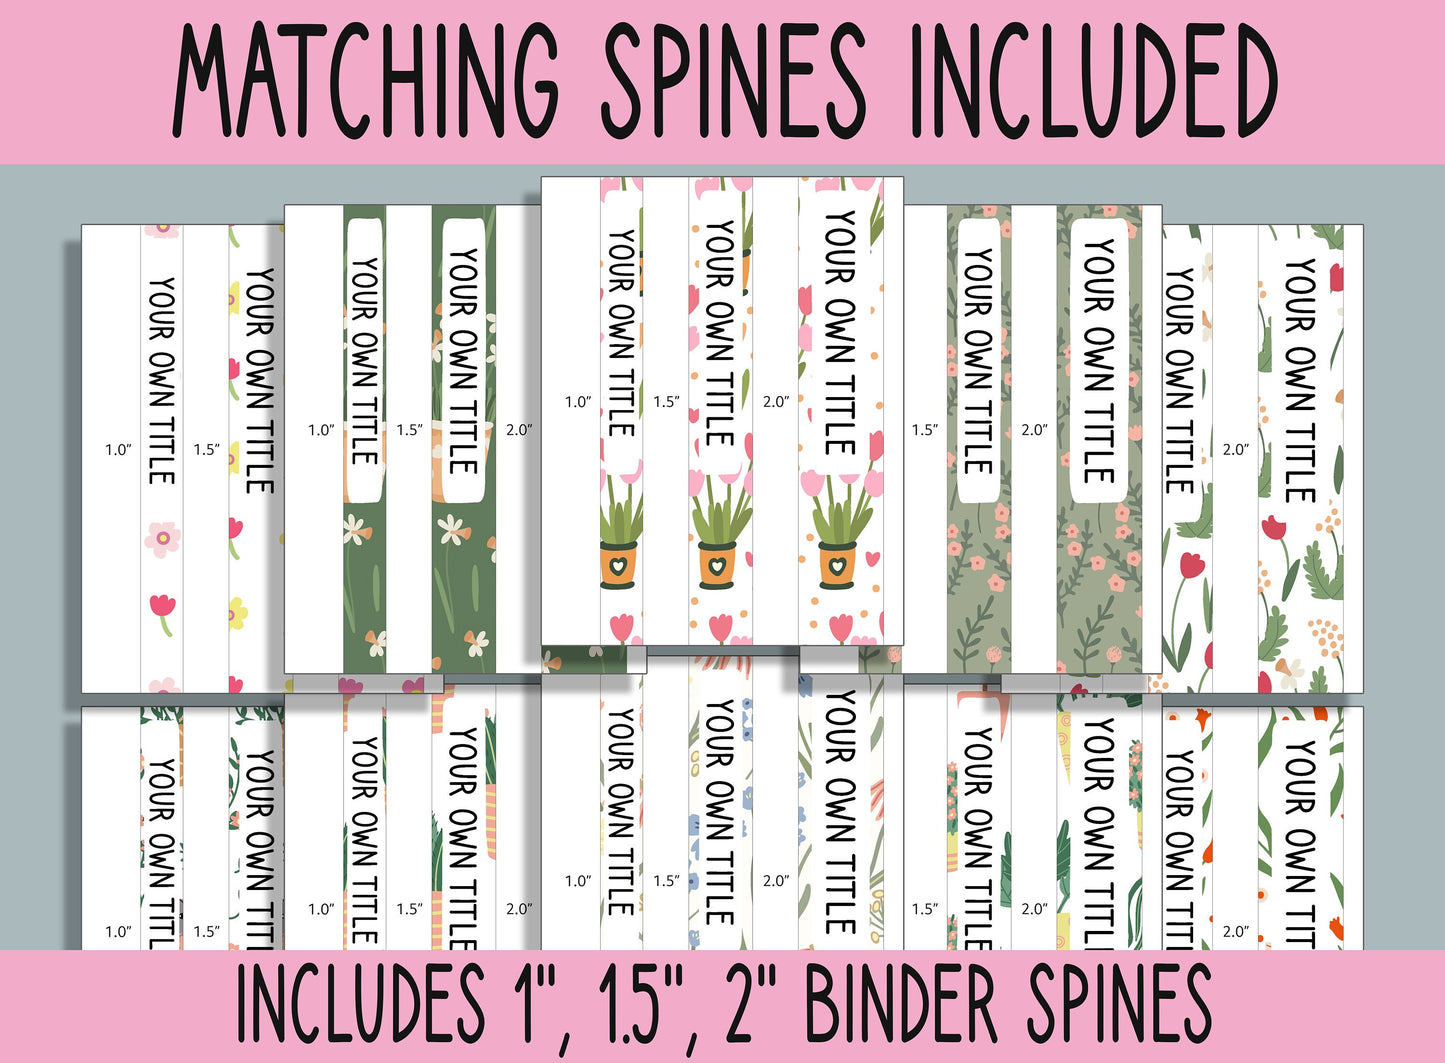 10 Editable Flower Binder Covers, Includes 1, 1.5, 2" Spines, Available in A4 & US Letter, Editing with PowerPoint or PDF Reader